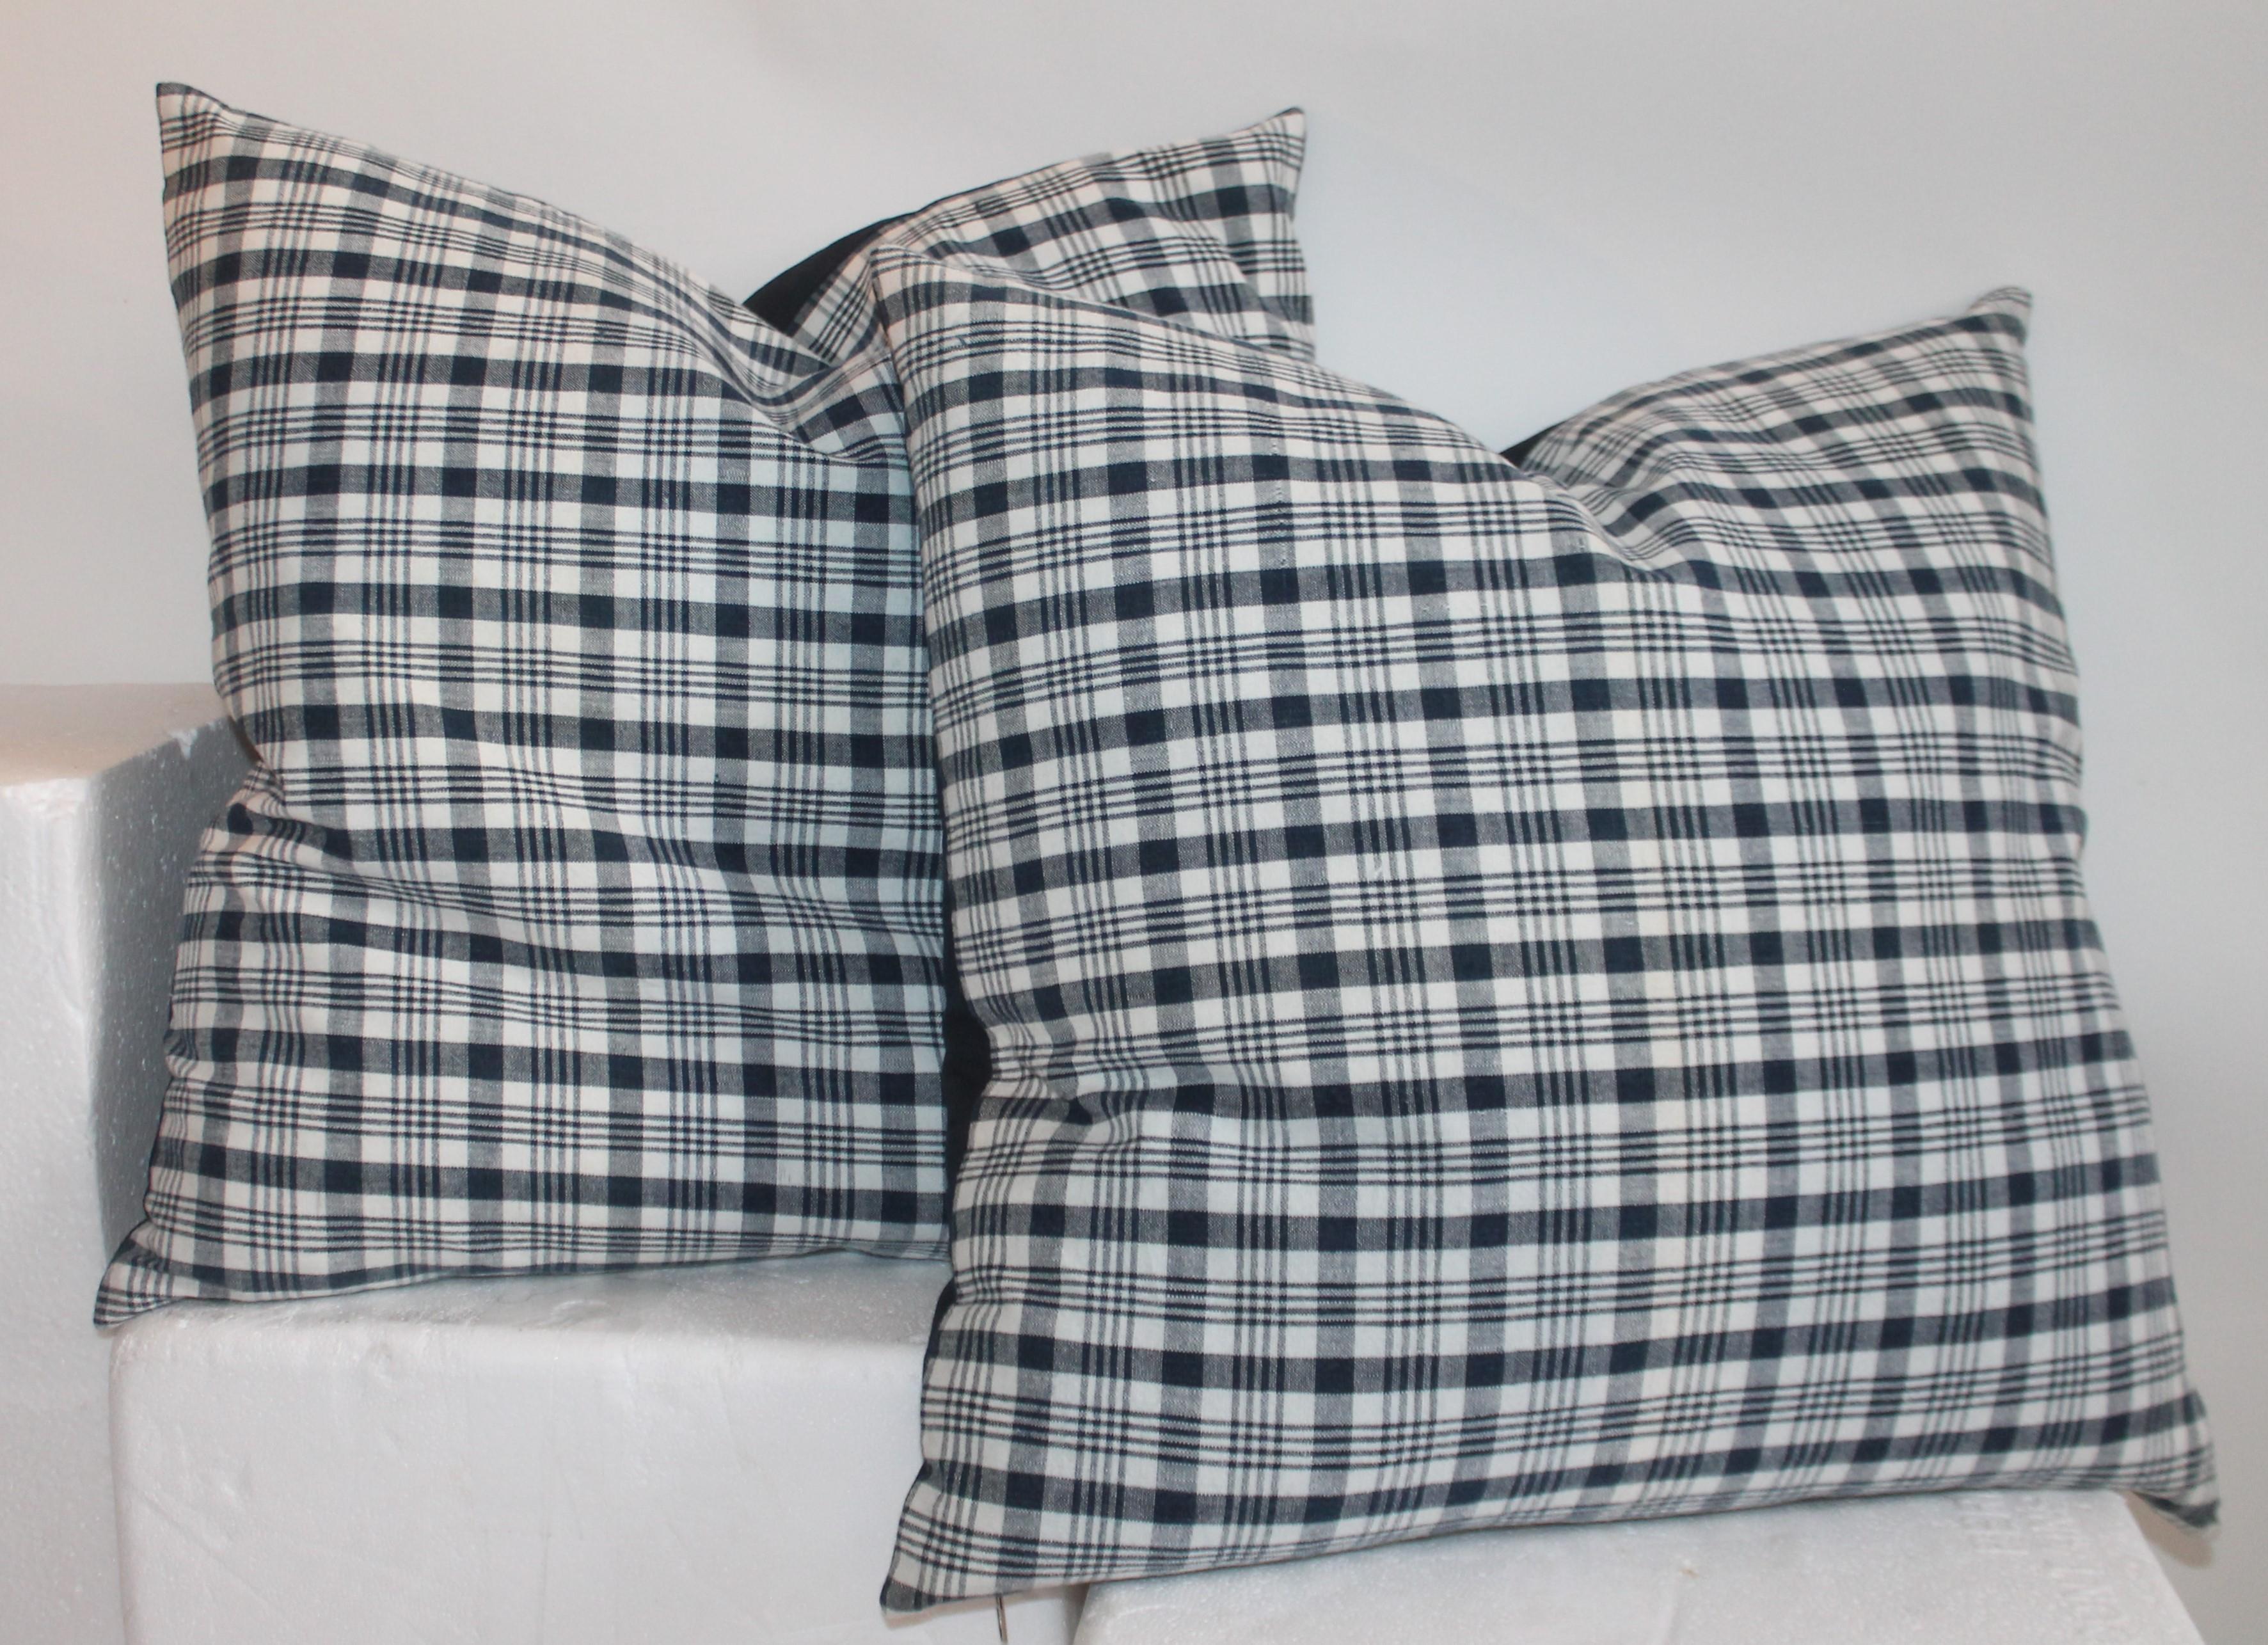 Pair of large pillows measure 22 x 22 19th century linen homespun indigo and white linen pillows. The backings are white cotton linen. The inserts are down and feather fill.
Smaller pillows measure 20 x 20.
 